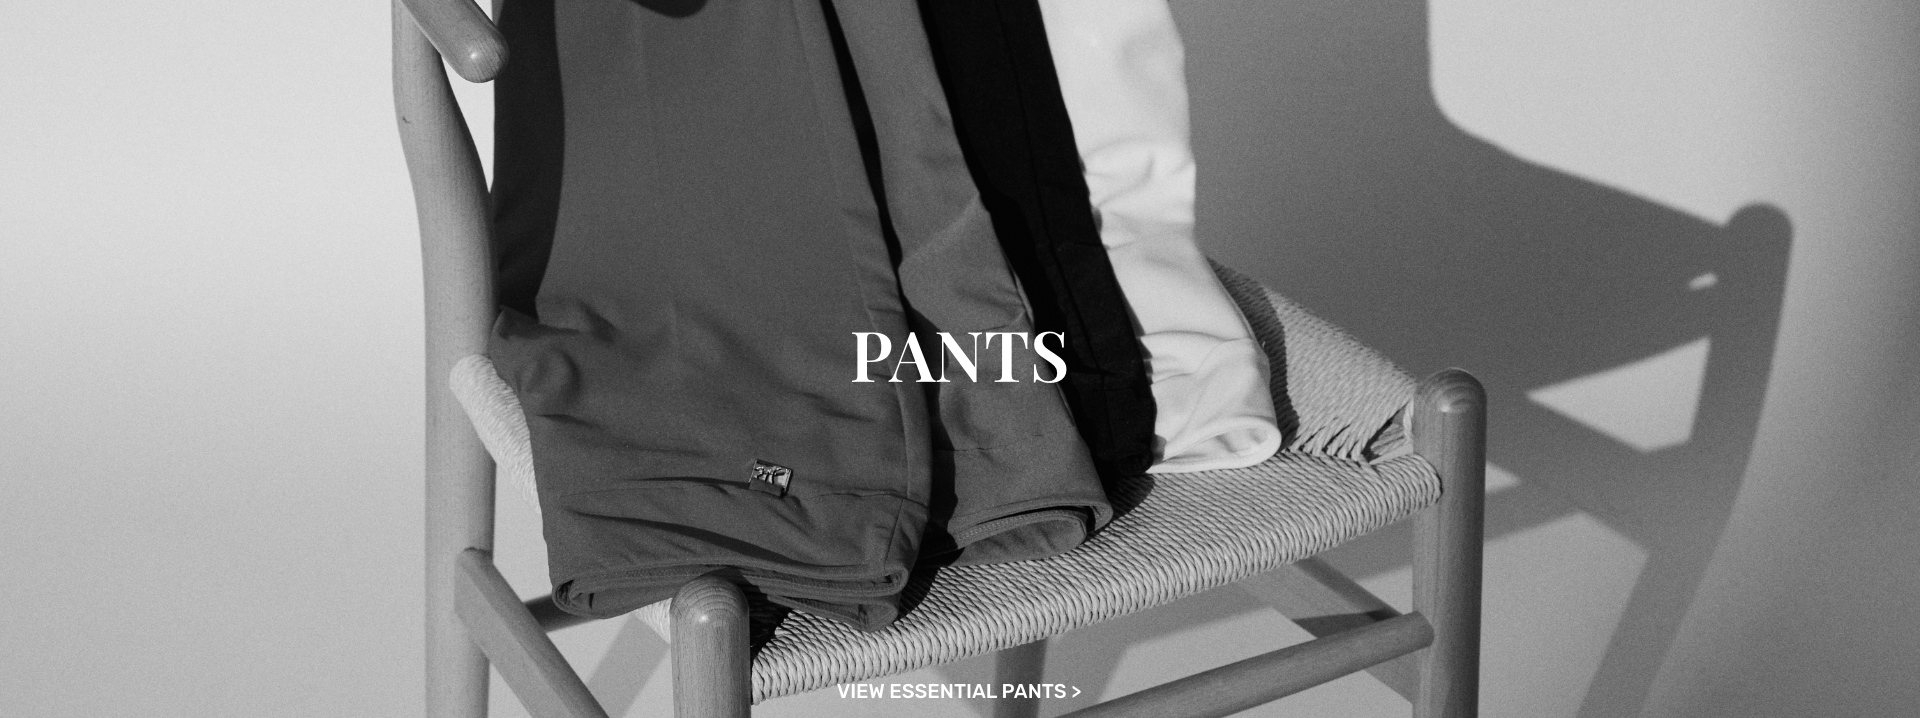 View Essential Pants >